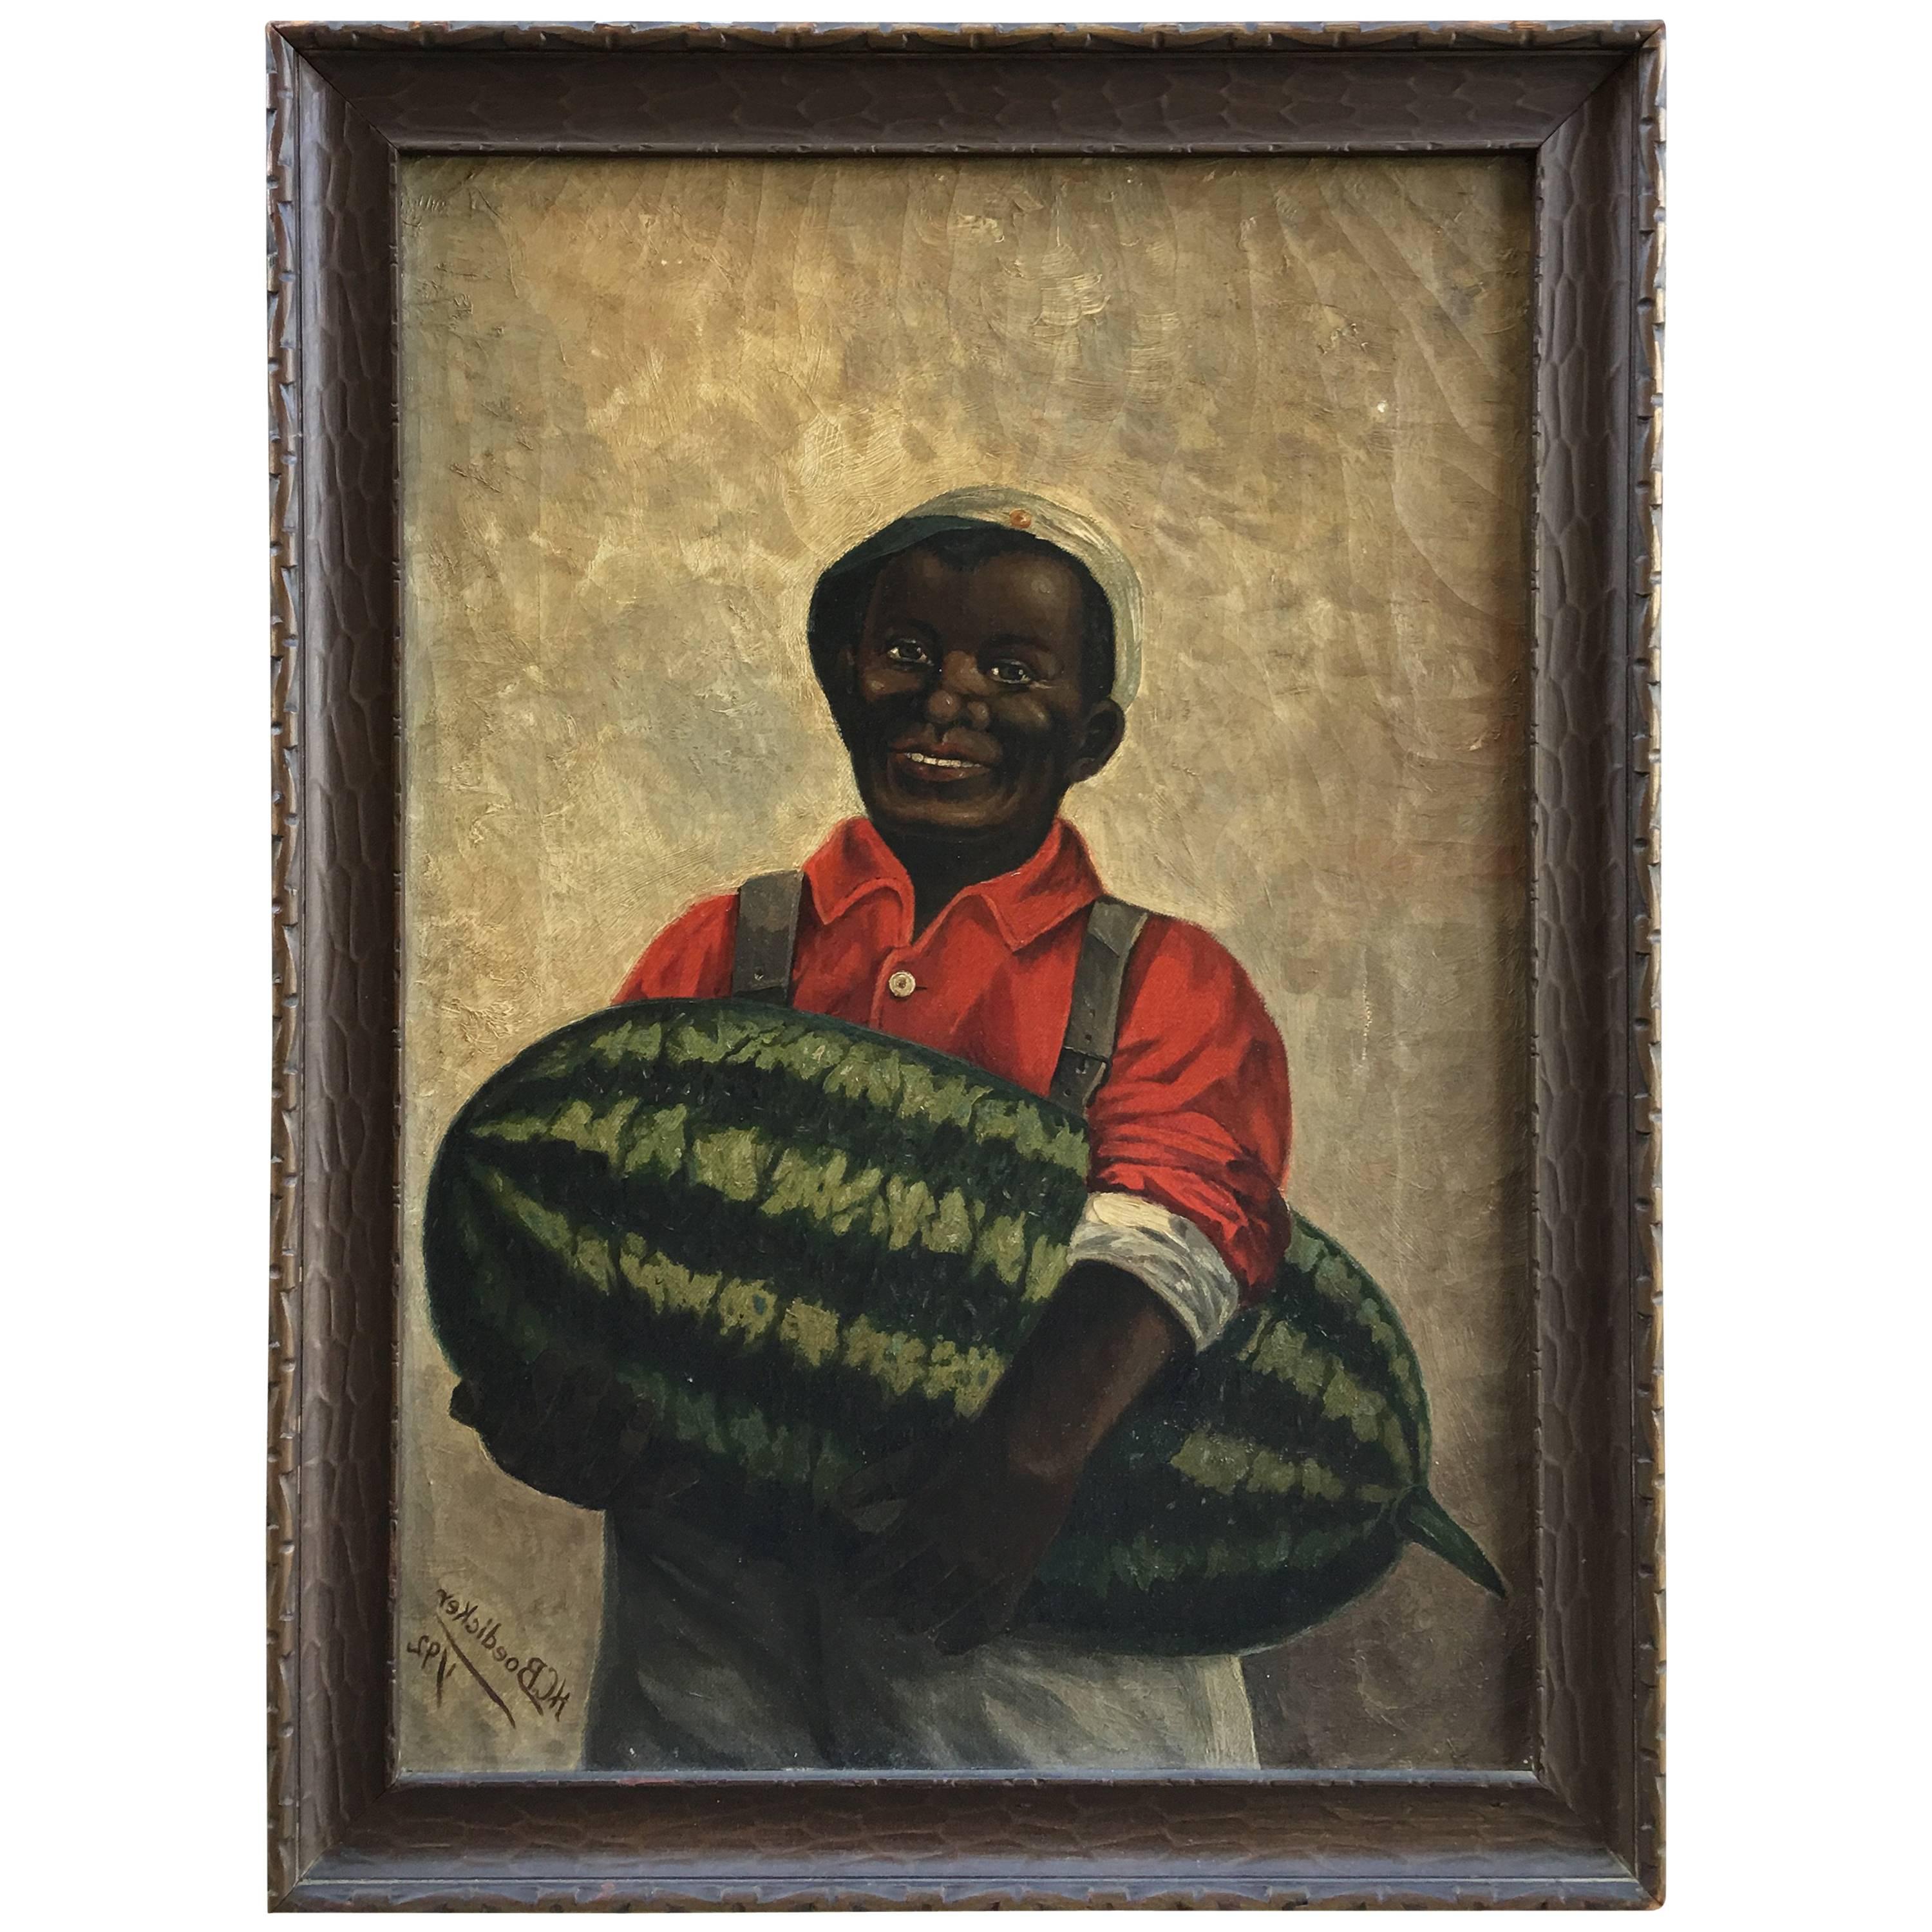 Oil on Panel "Man with Prize Winning Watermelon"